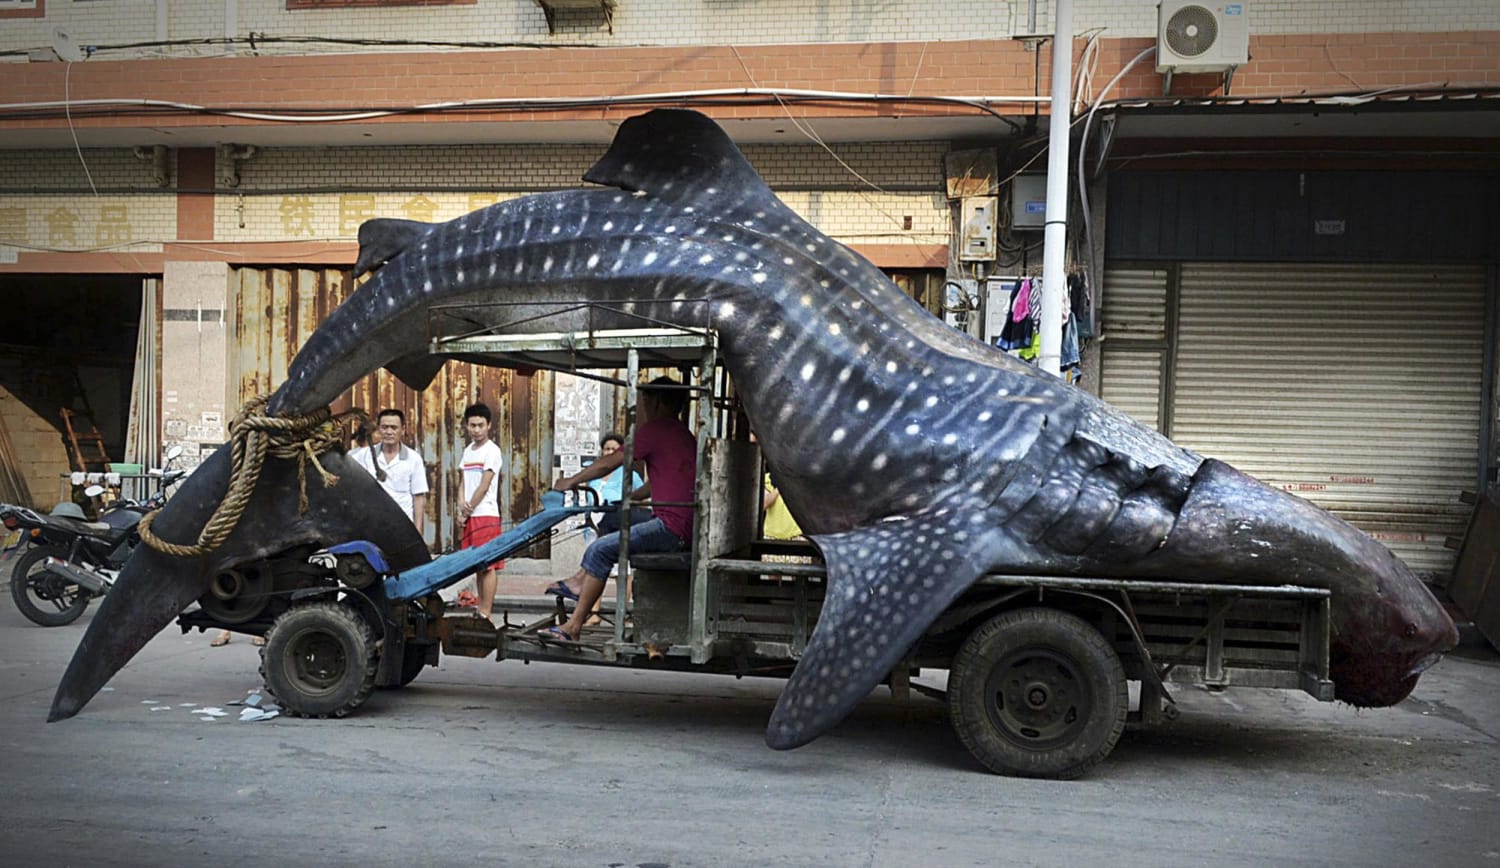 giant whale shark compared to human